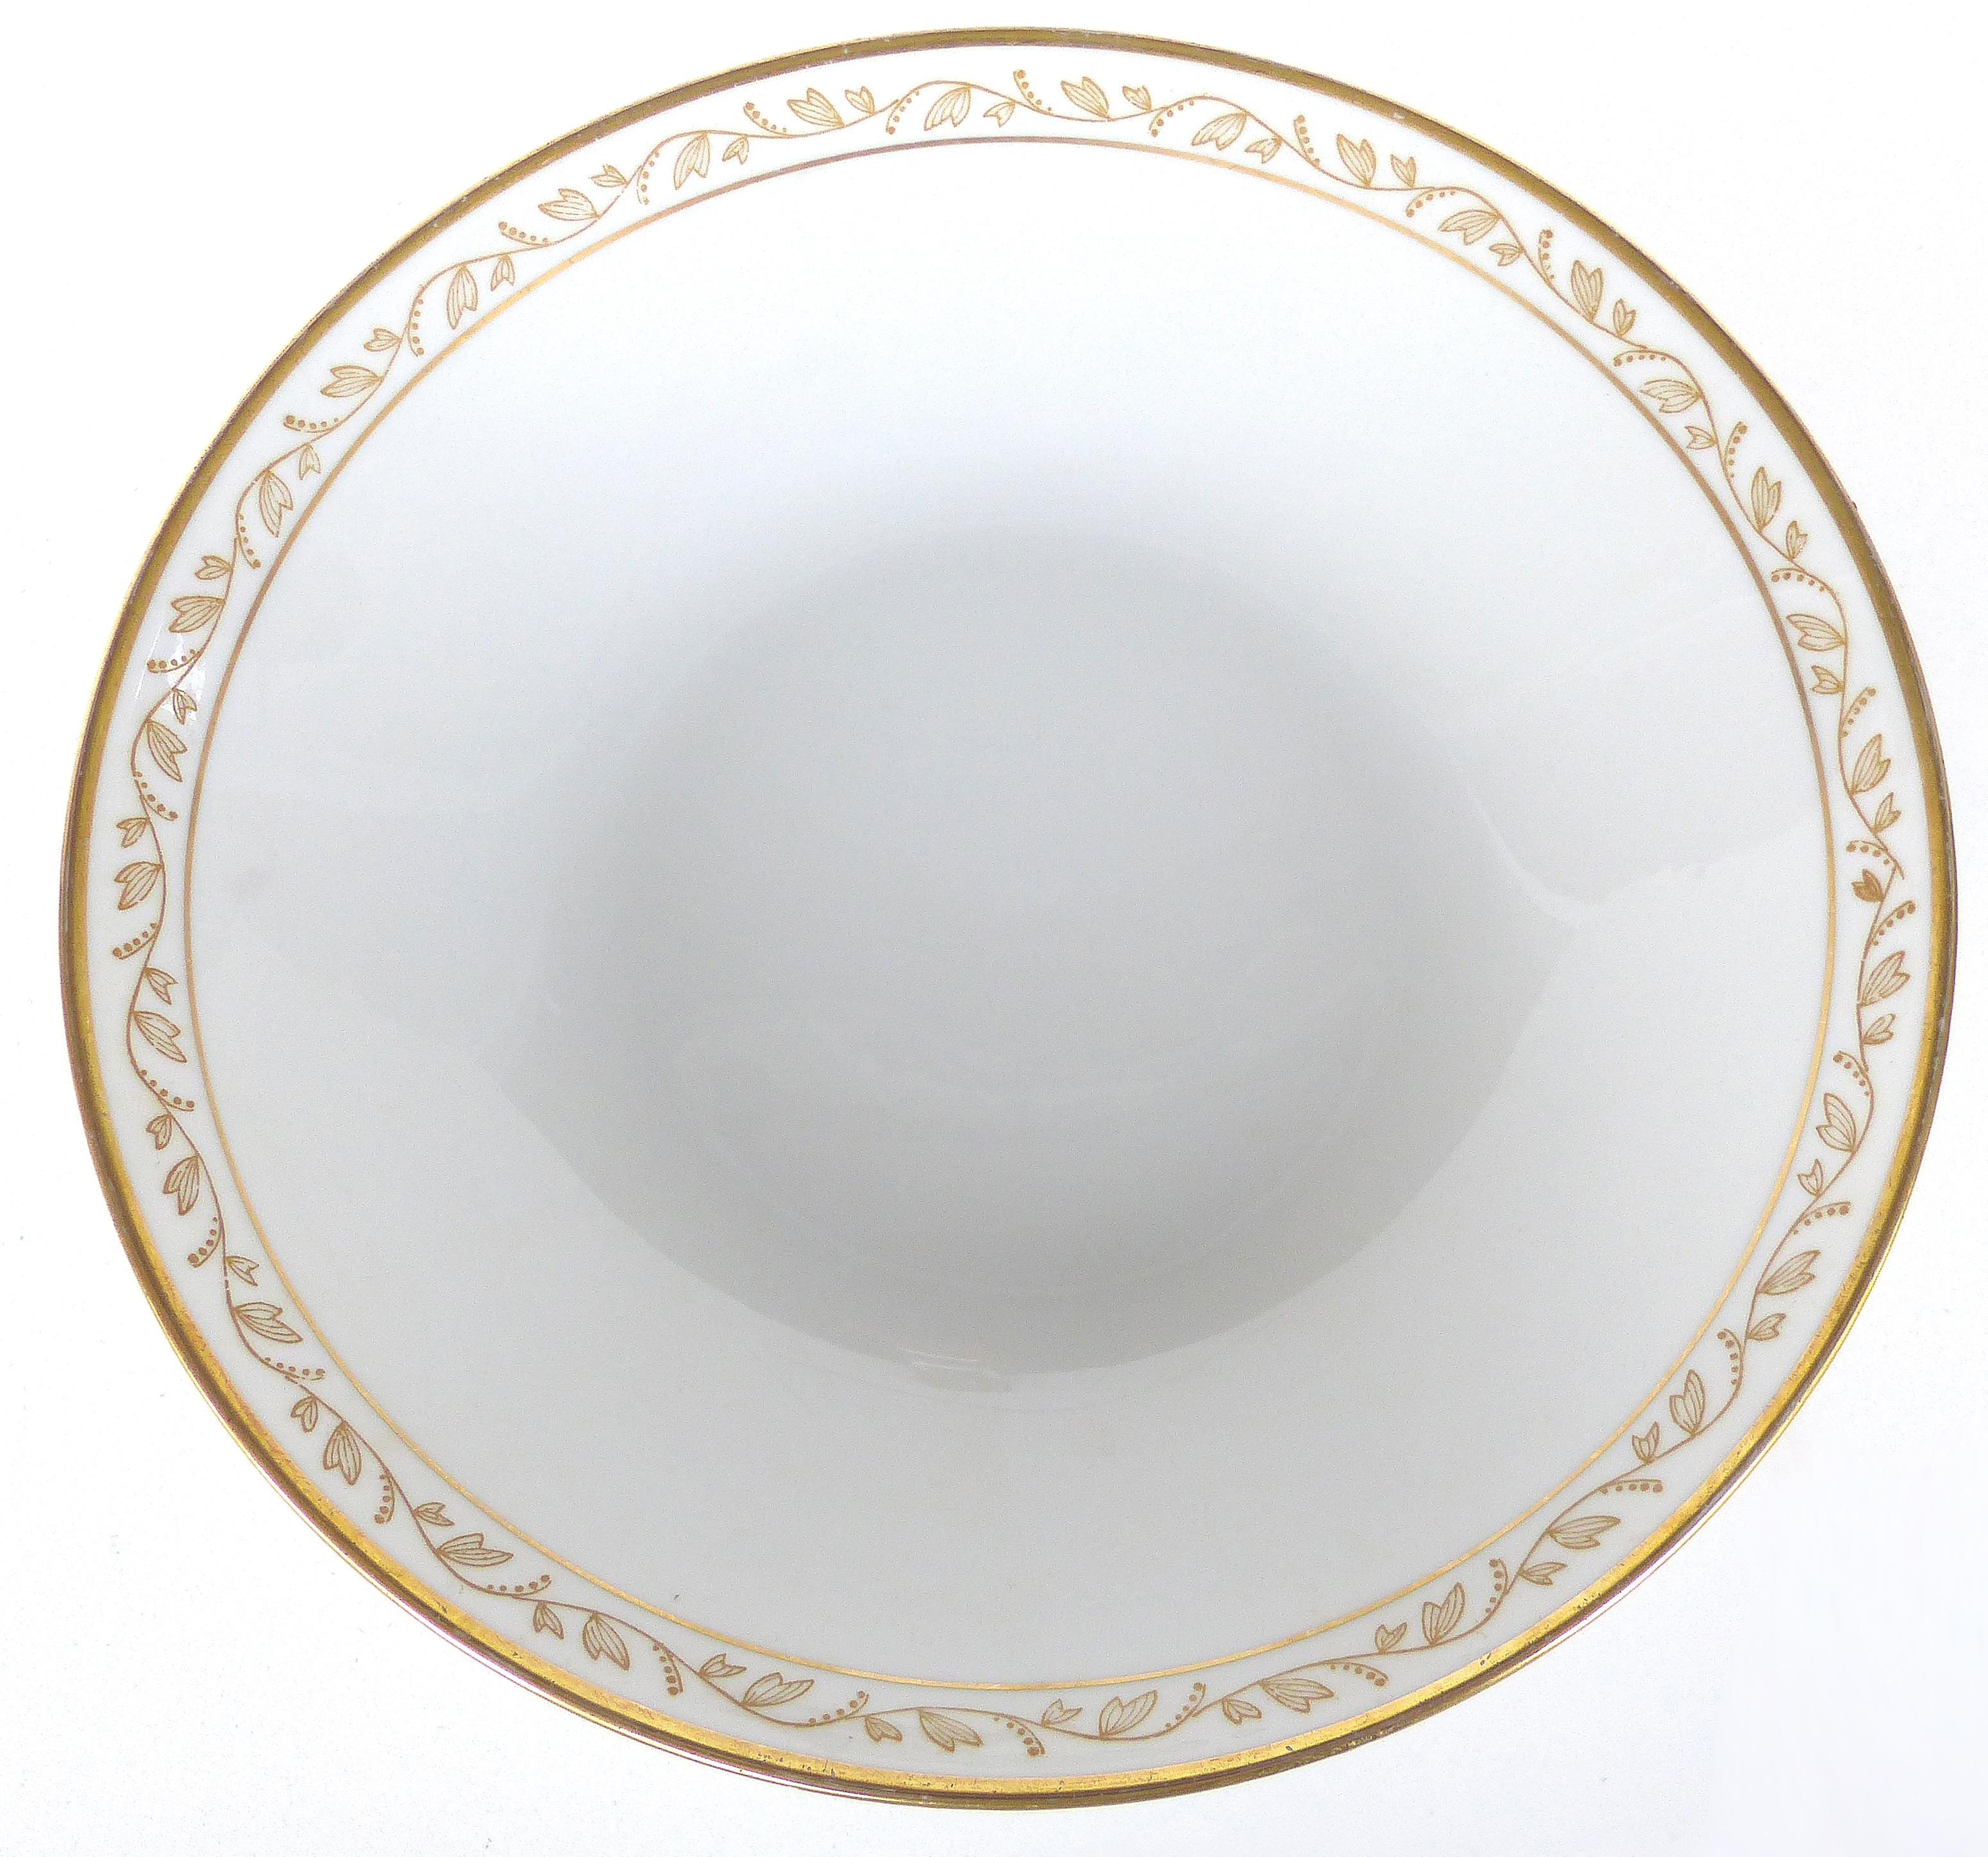 Offered for sale is a set of 12 porcelain China bowls by Rörstrand Sweden in the Delicia pattern. These china bowls have a gilt vine decoration and banding on the rims.